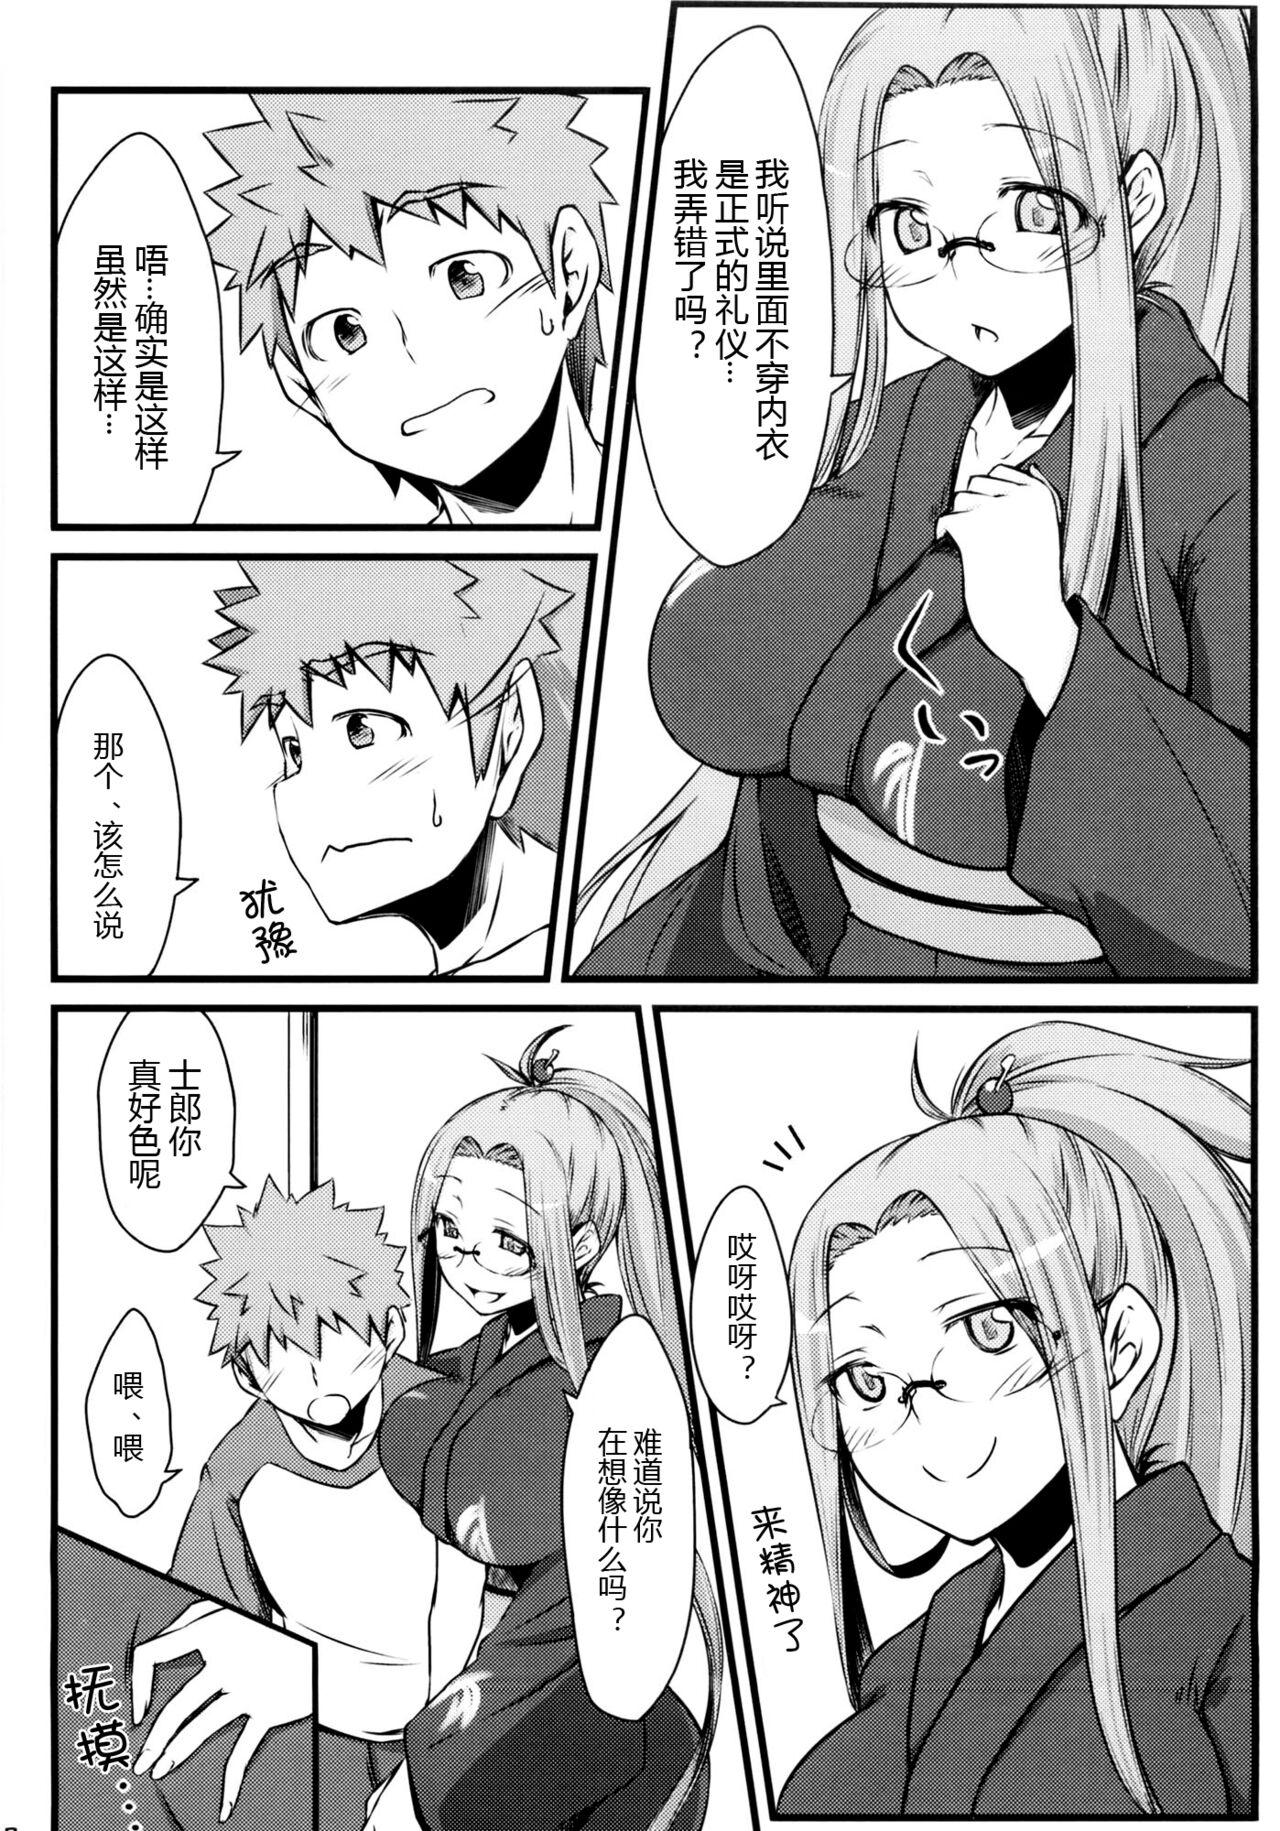 Mommy R8 - Fate stay night Fate hollow ataraxia Tranny Sex - Page 7